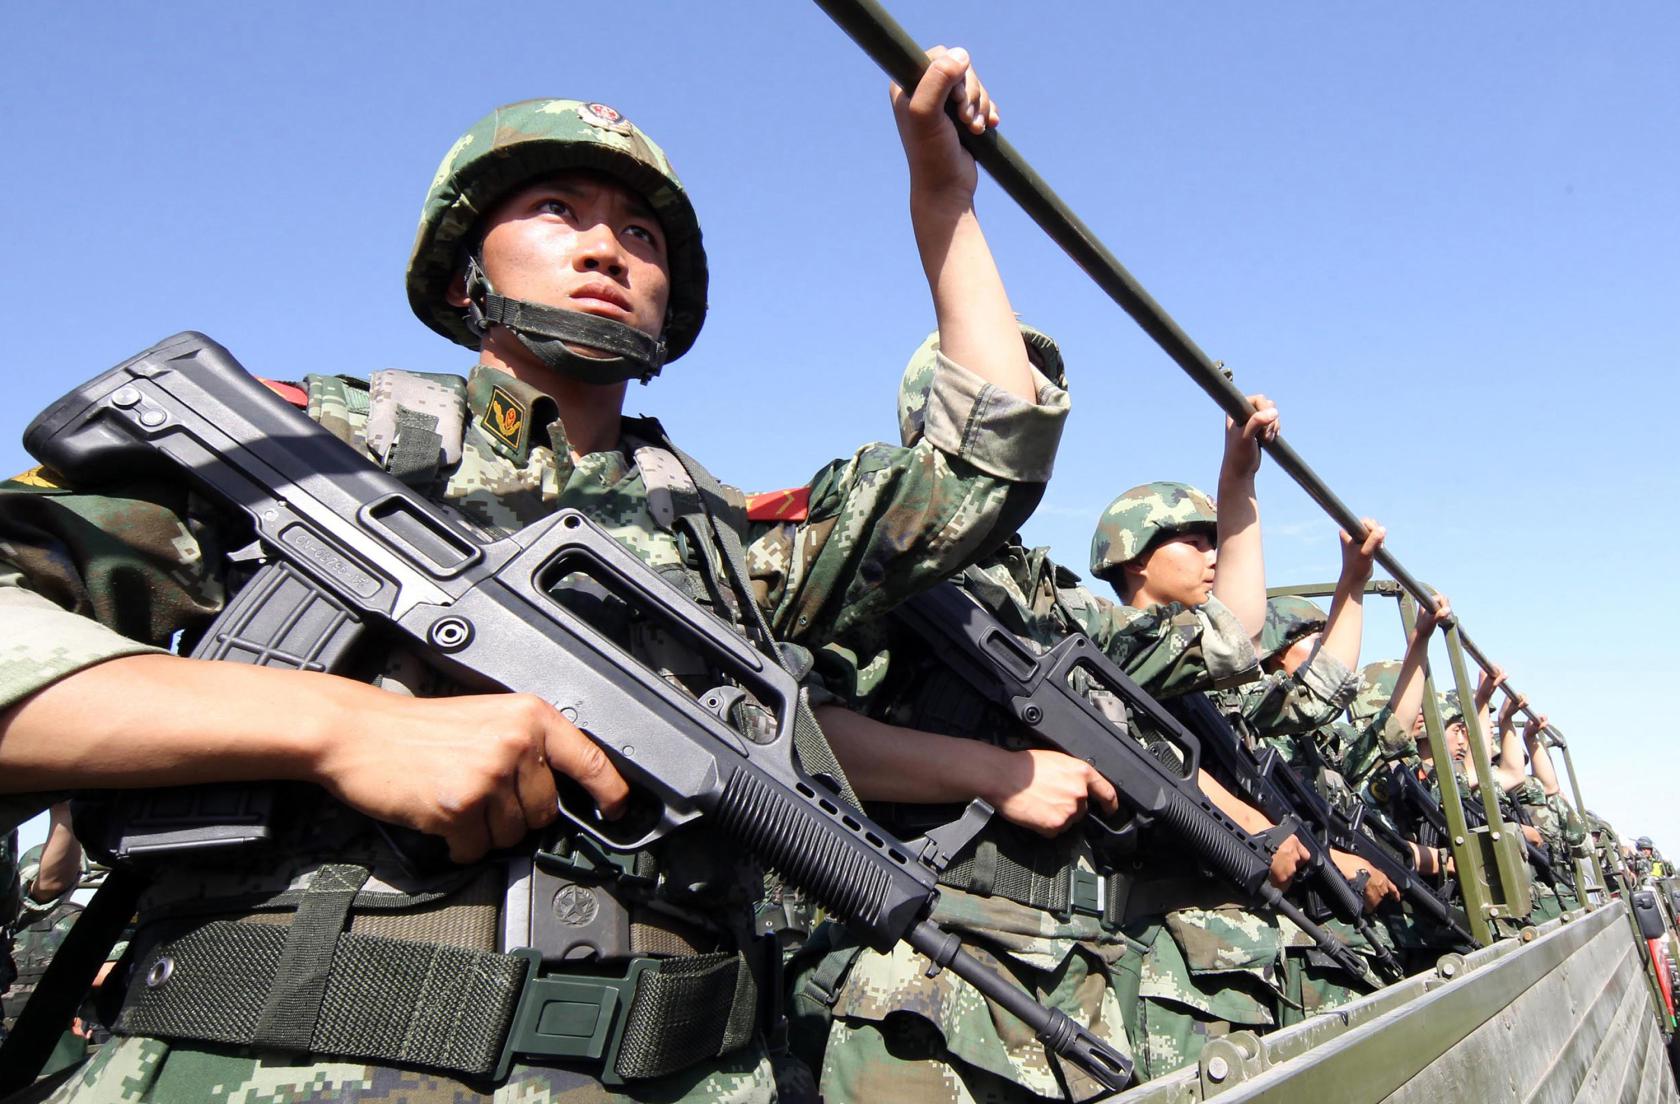 An anti-terrorism force including public security police and the armed police attend an anti-terrorism joint exercise in Hami, northwest China's Xinjiang region on July 2, 2013. The United States is encouraging "terrorism" in Xinjiang, Chinese state media said on July 1, also claiming that separatists in the region -- which has a large Uighur minority -- had fought alongside Syrian rebels. CHINA OUT AFP PHOTO (Photo credit should read STR/AFP/Getty Images)